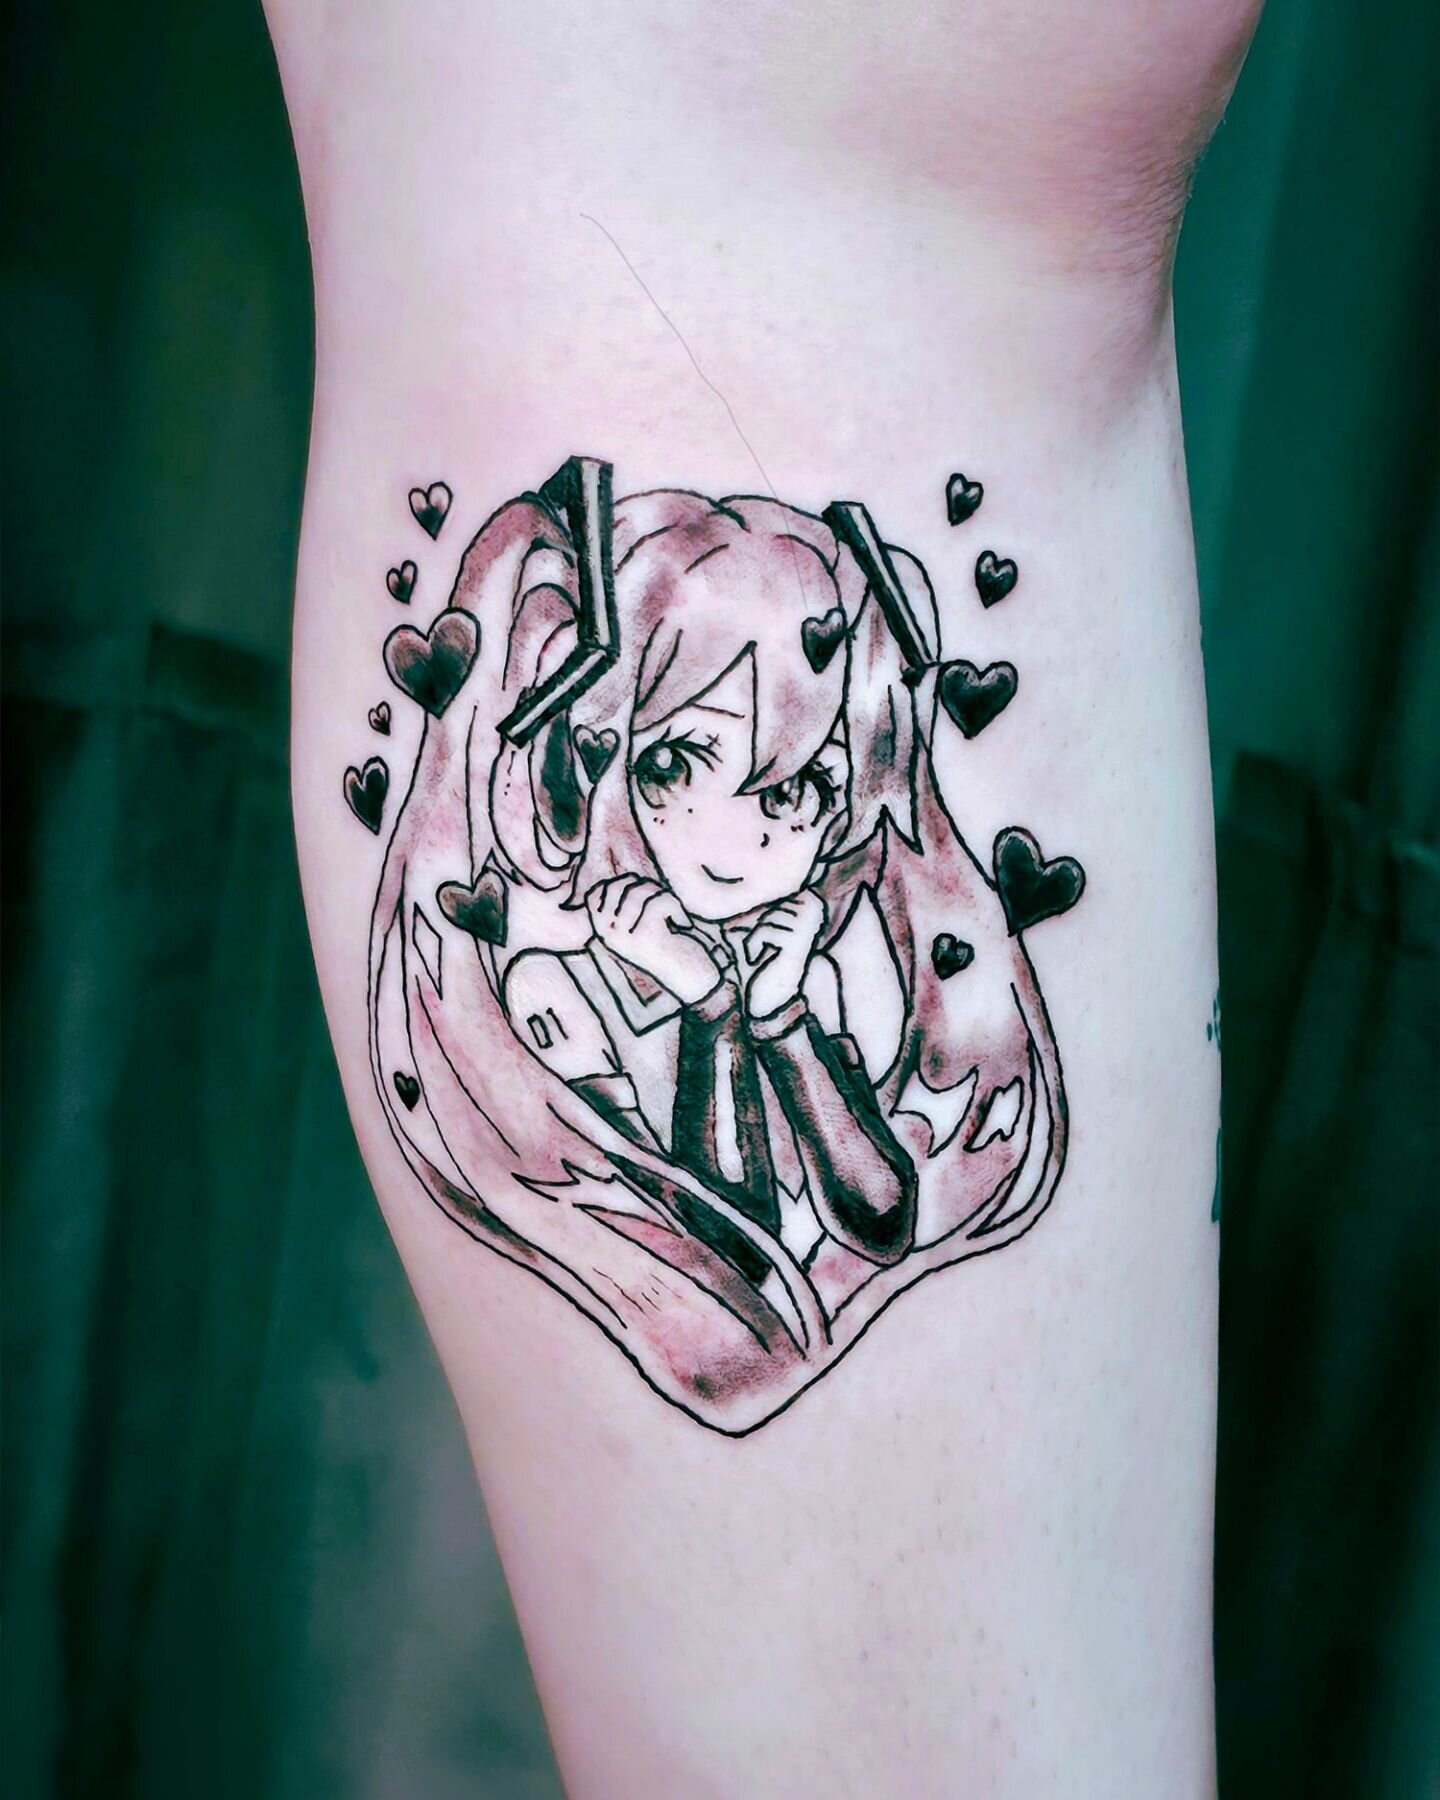 Black and gray Miku tattoo from my valentine's flash. I adore Miku. Drop by the studio and see the sheer embarrassing amount of times I've drawn her. ^^; What's your favorite vocaloid song? I'm stuck on ﾎﾞﾙﾃｯｶ lately from Project Voltage. 

Come see 